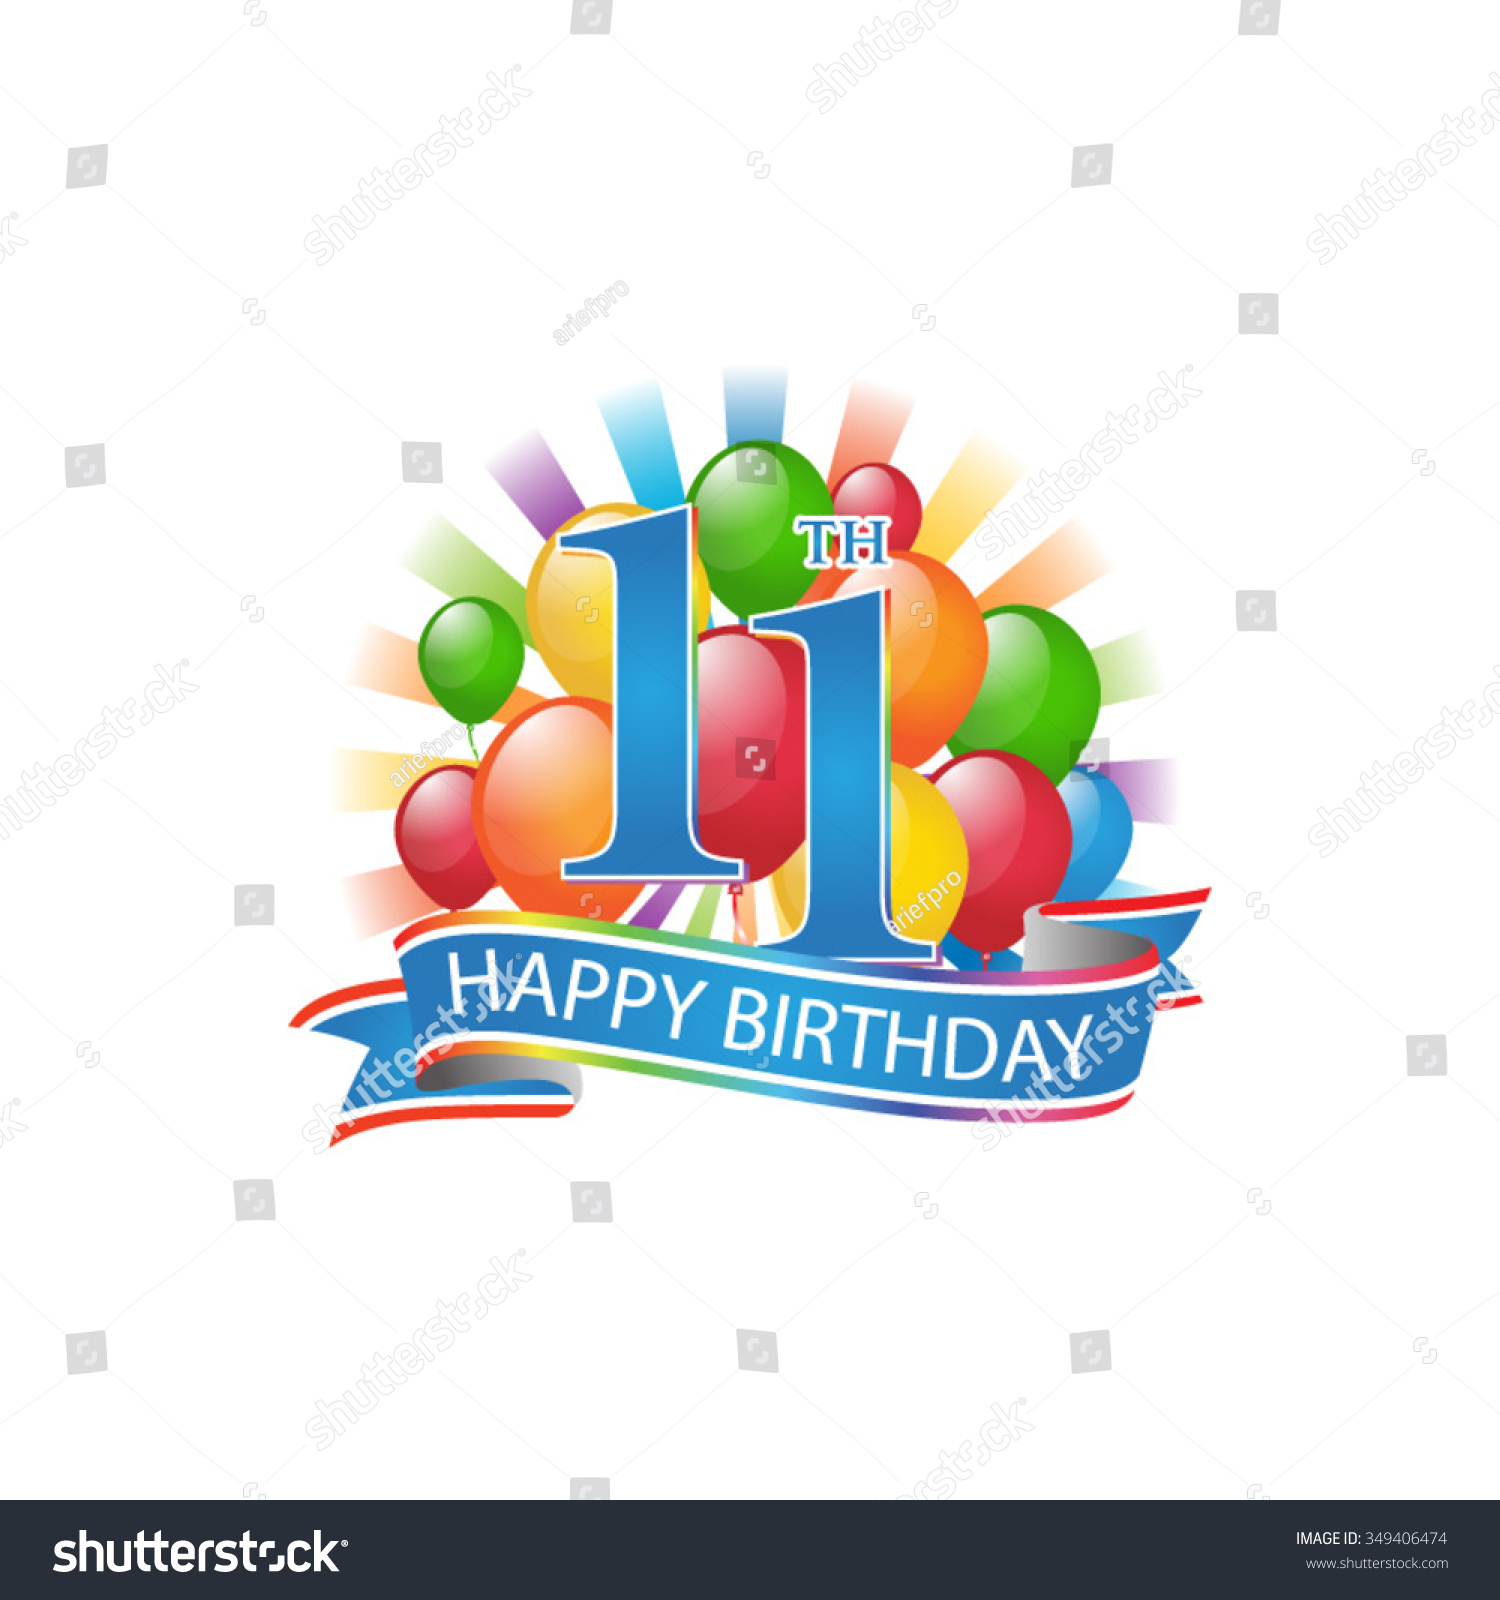 11th Colorful Happy Birthday Logo With Balloons And Burst Of Light ...